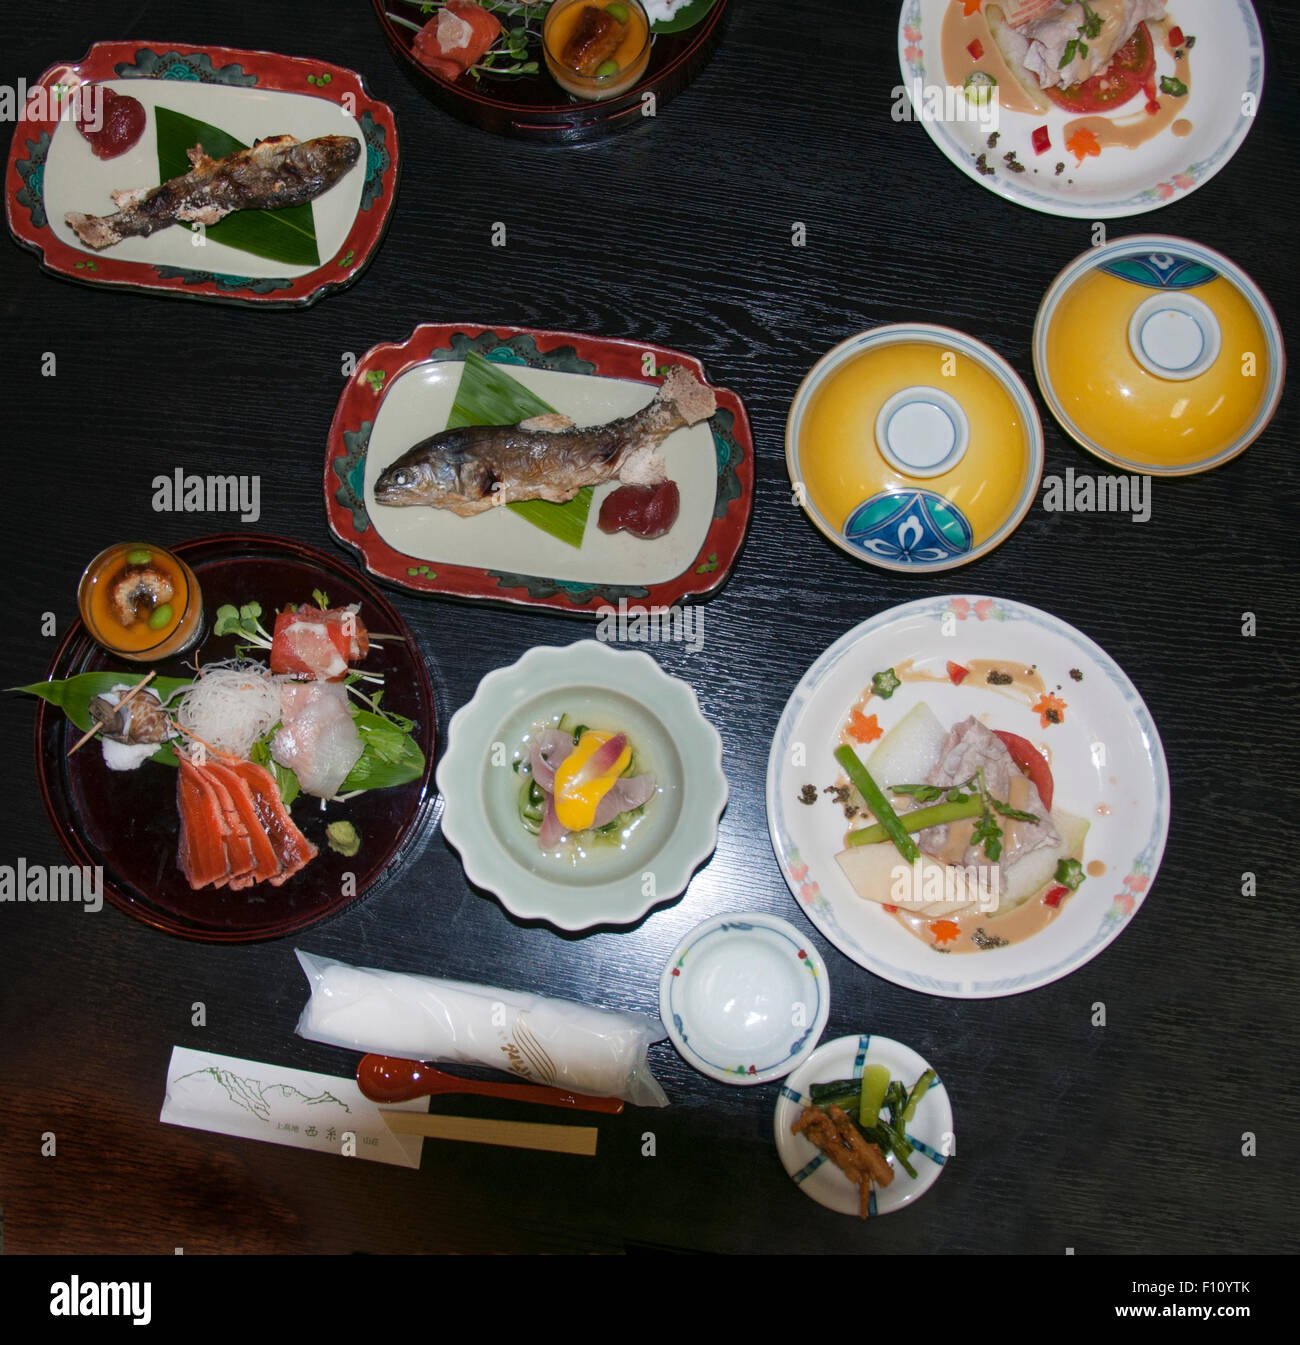 A typical Japanese meal. Stock Photo